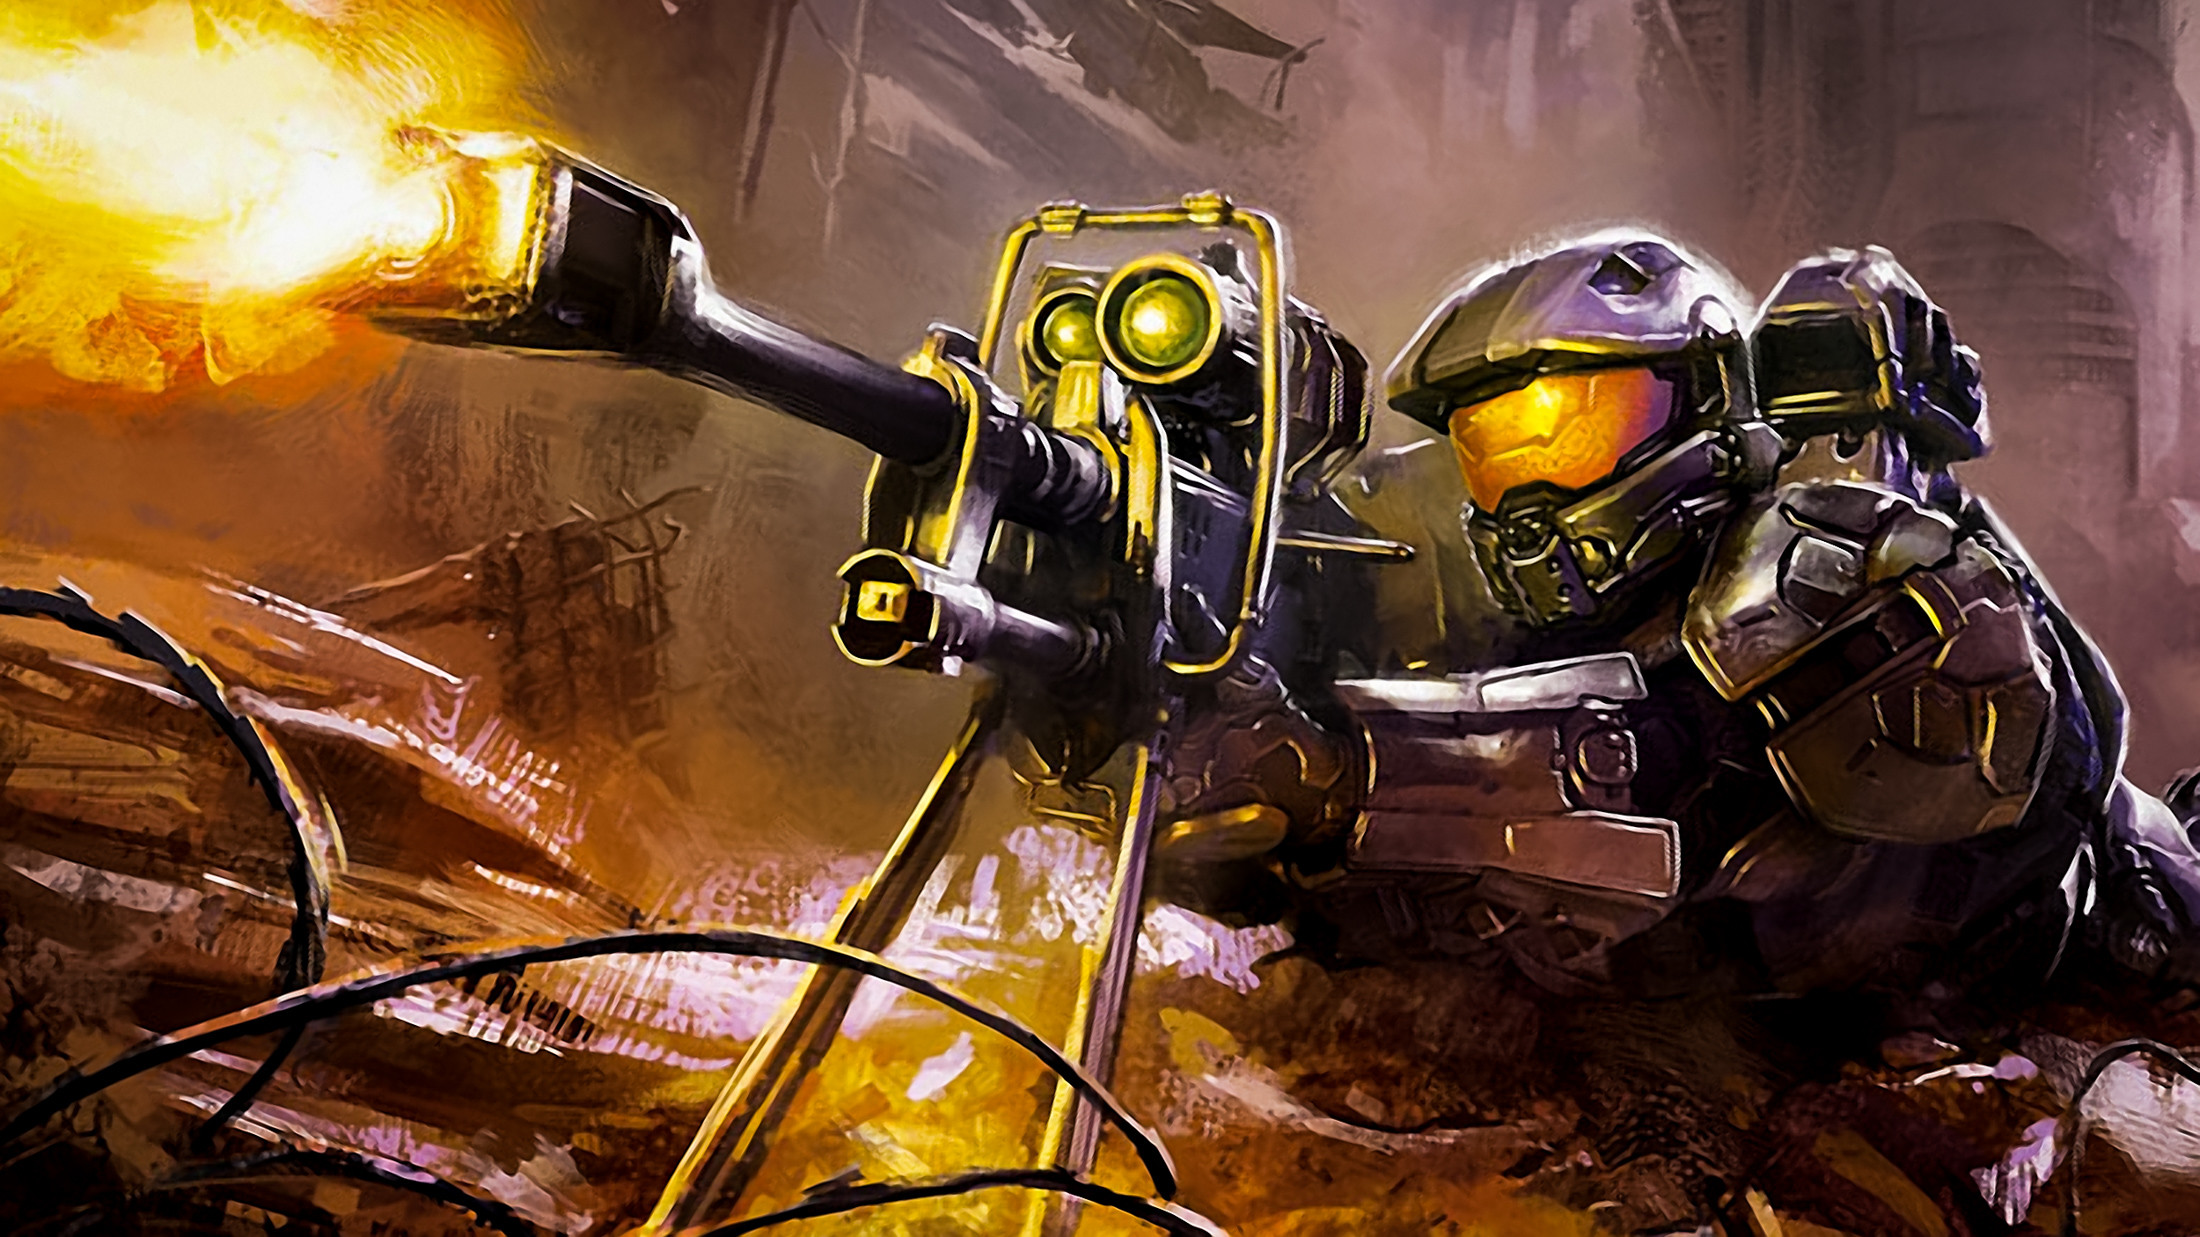 halo master chief wallpaper,action adventure game,firefighter,illustration,strategy video game,cg artwork